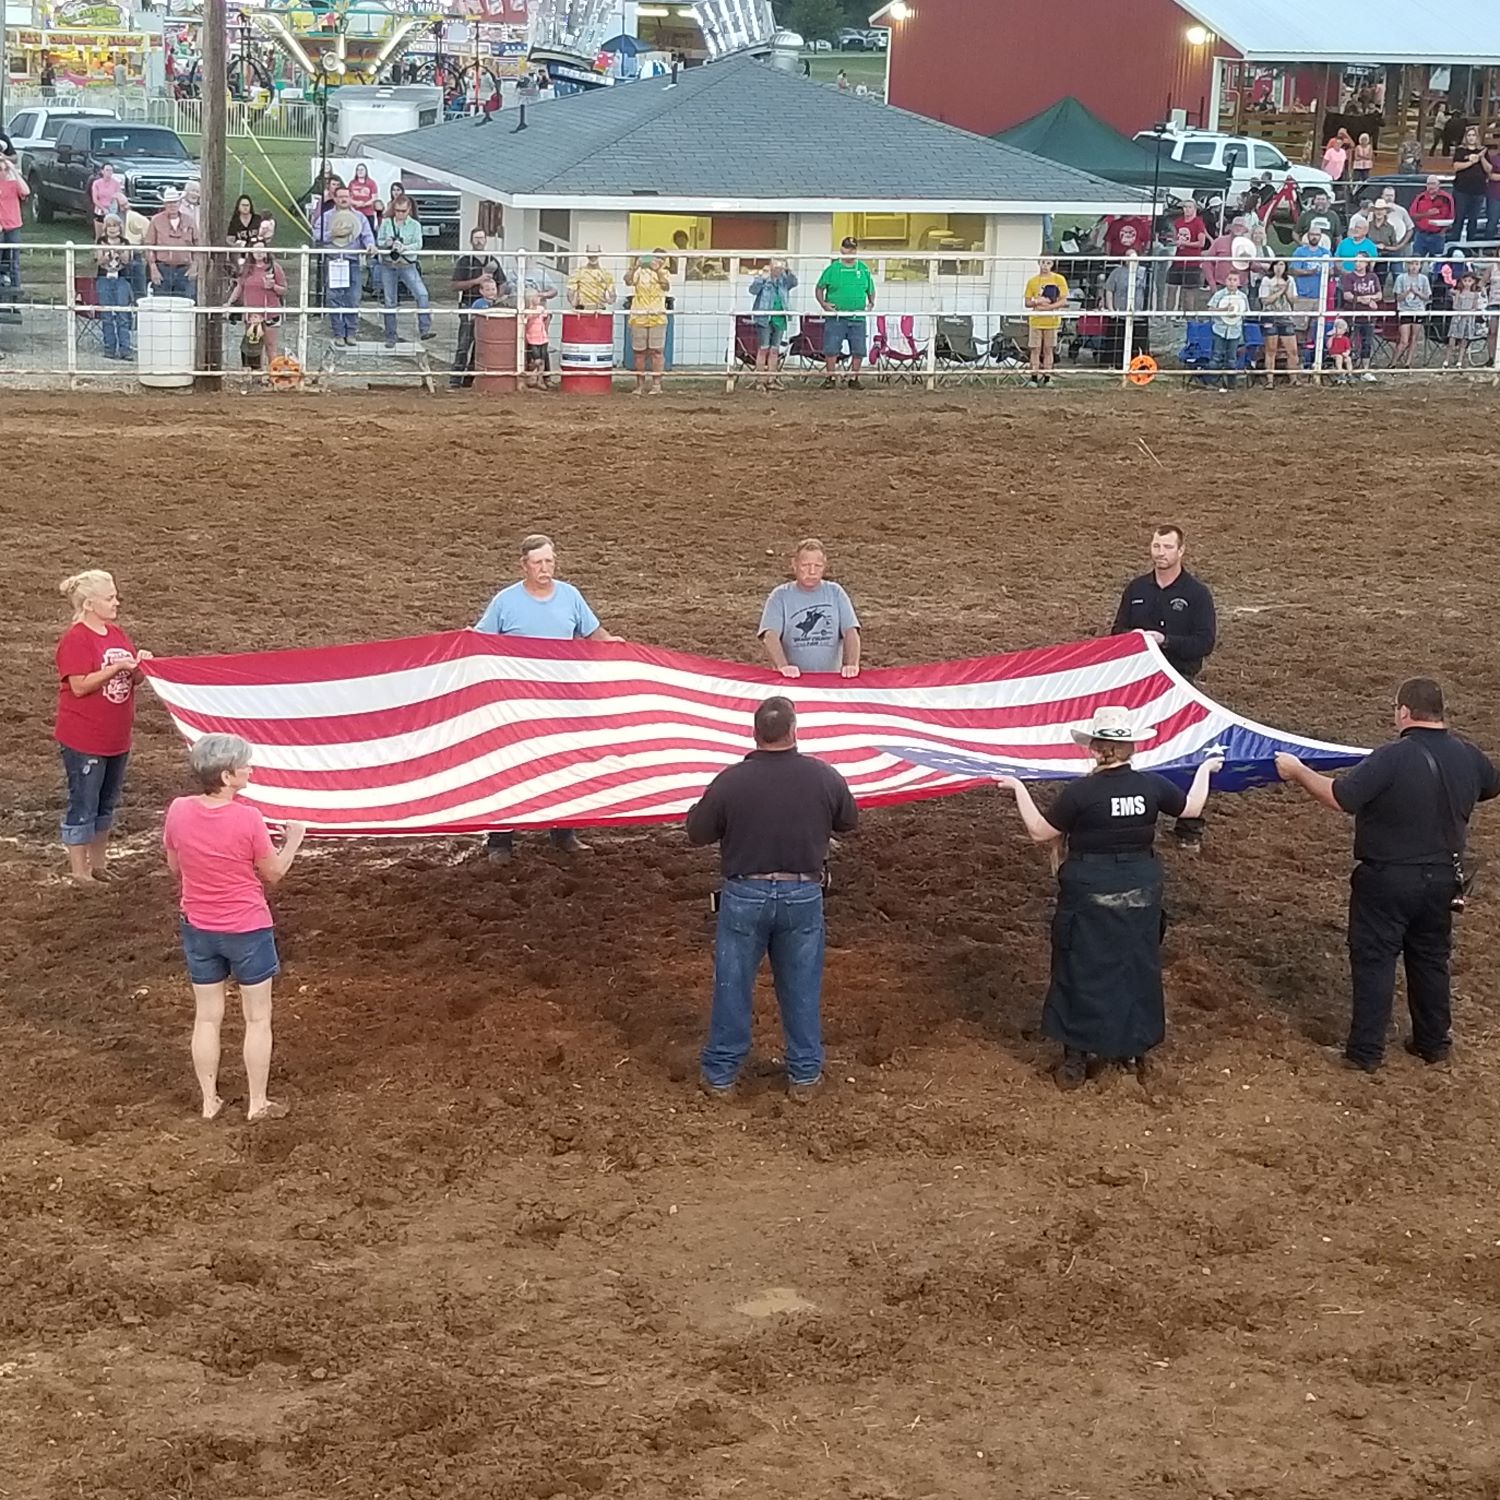 8 people folding a US flag on a dirt floor in front of a crowd